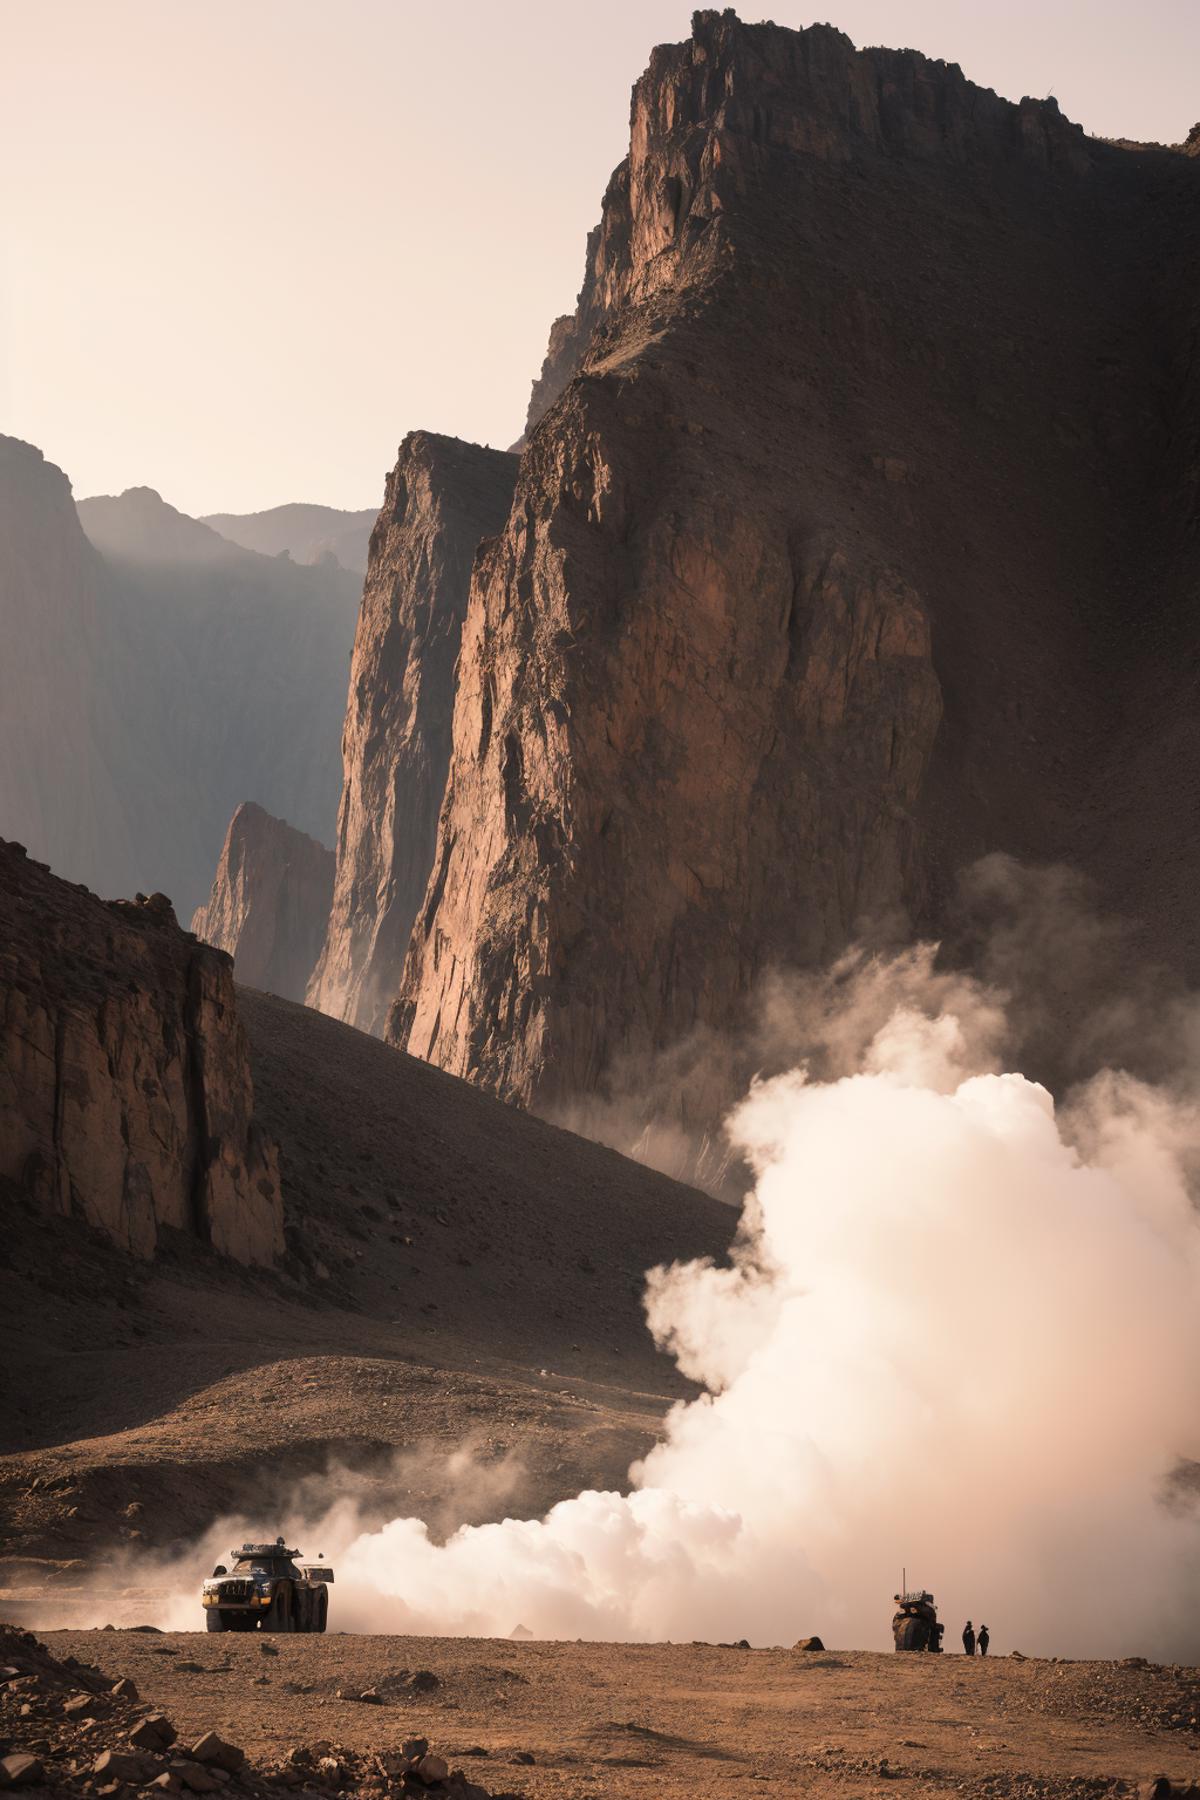 A mountain with a waterfall and smoke rising from it.